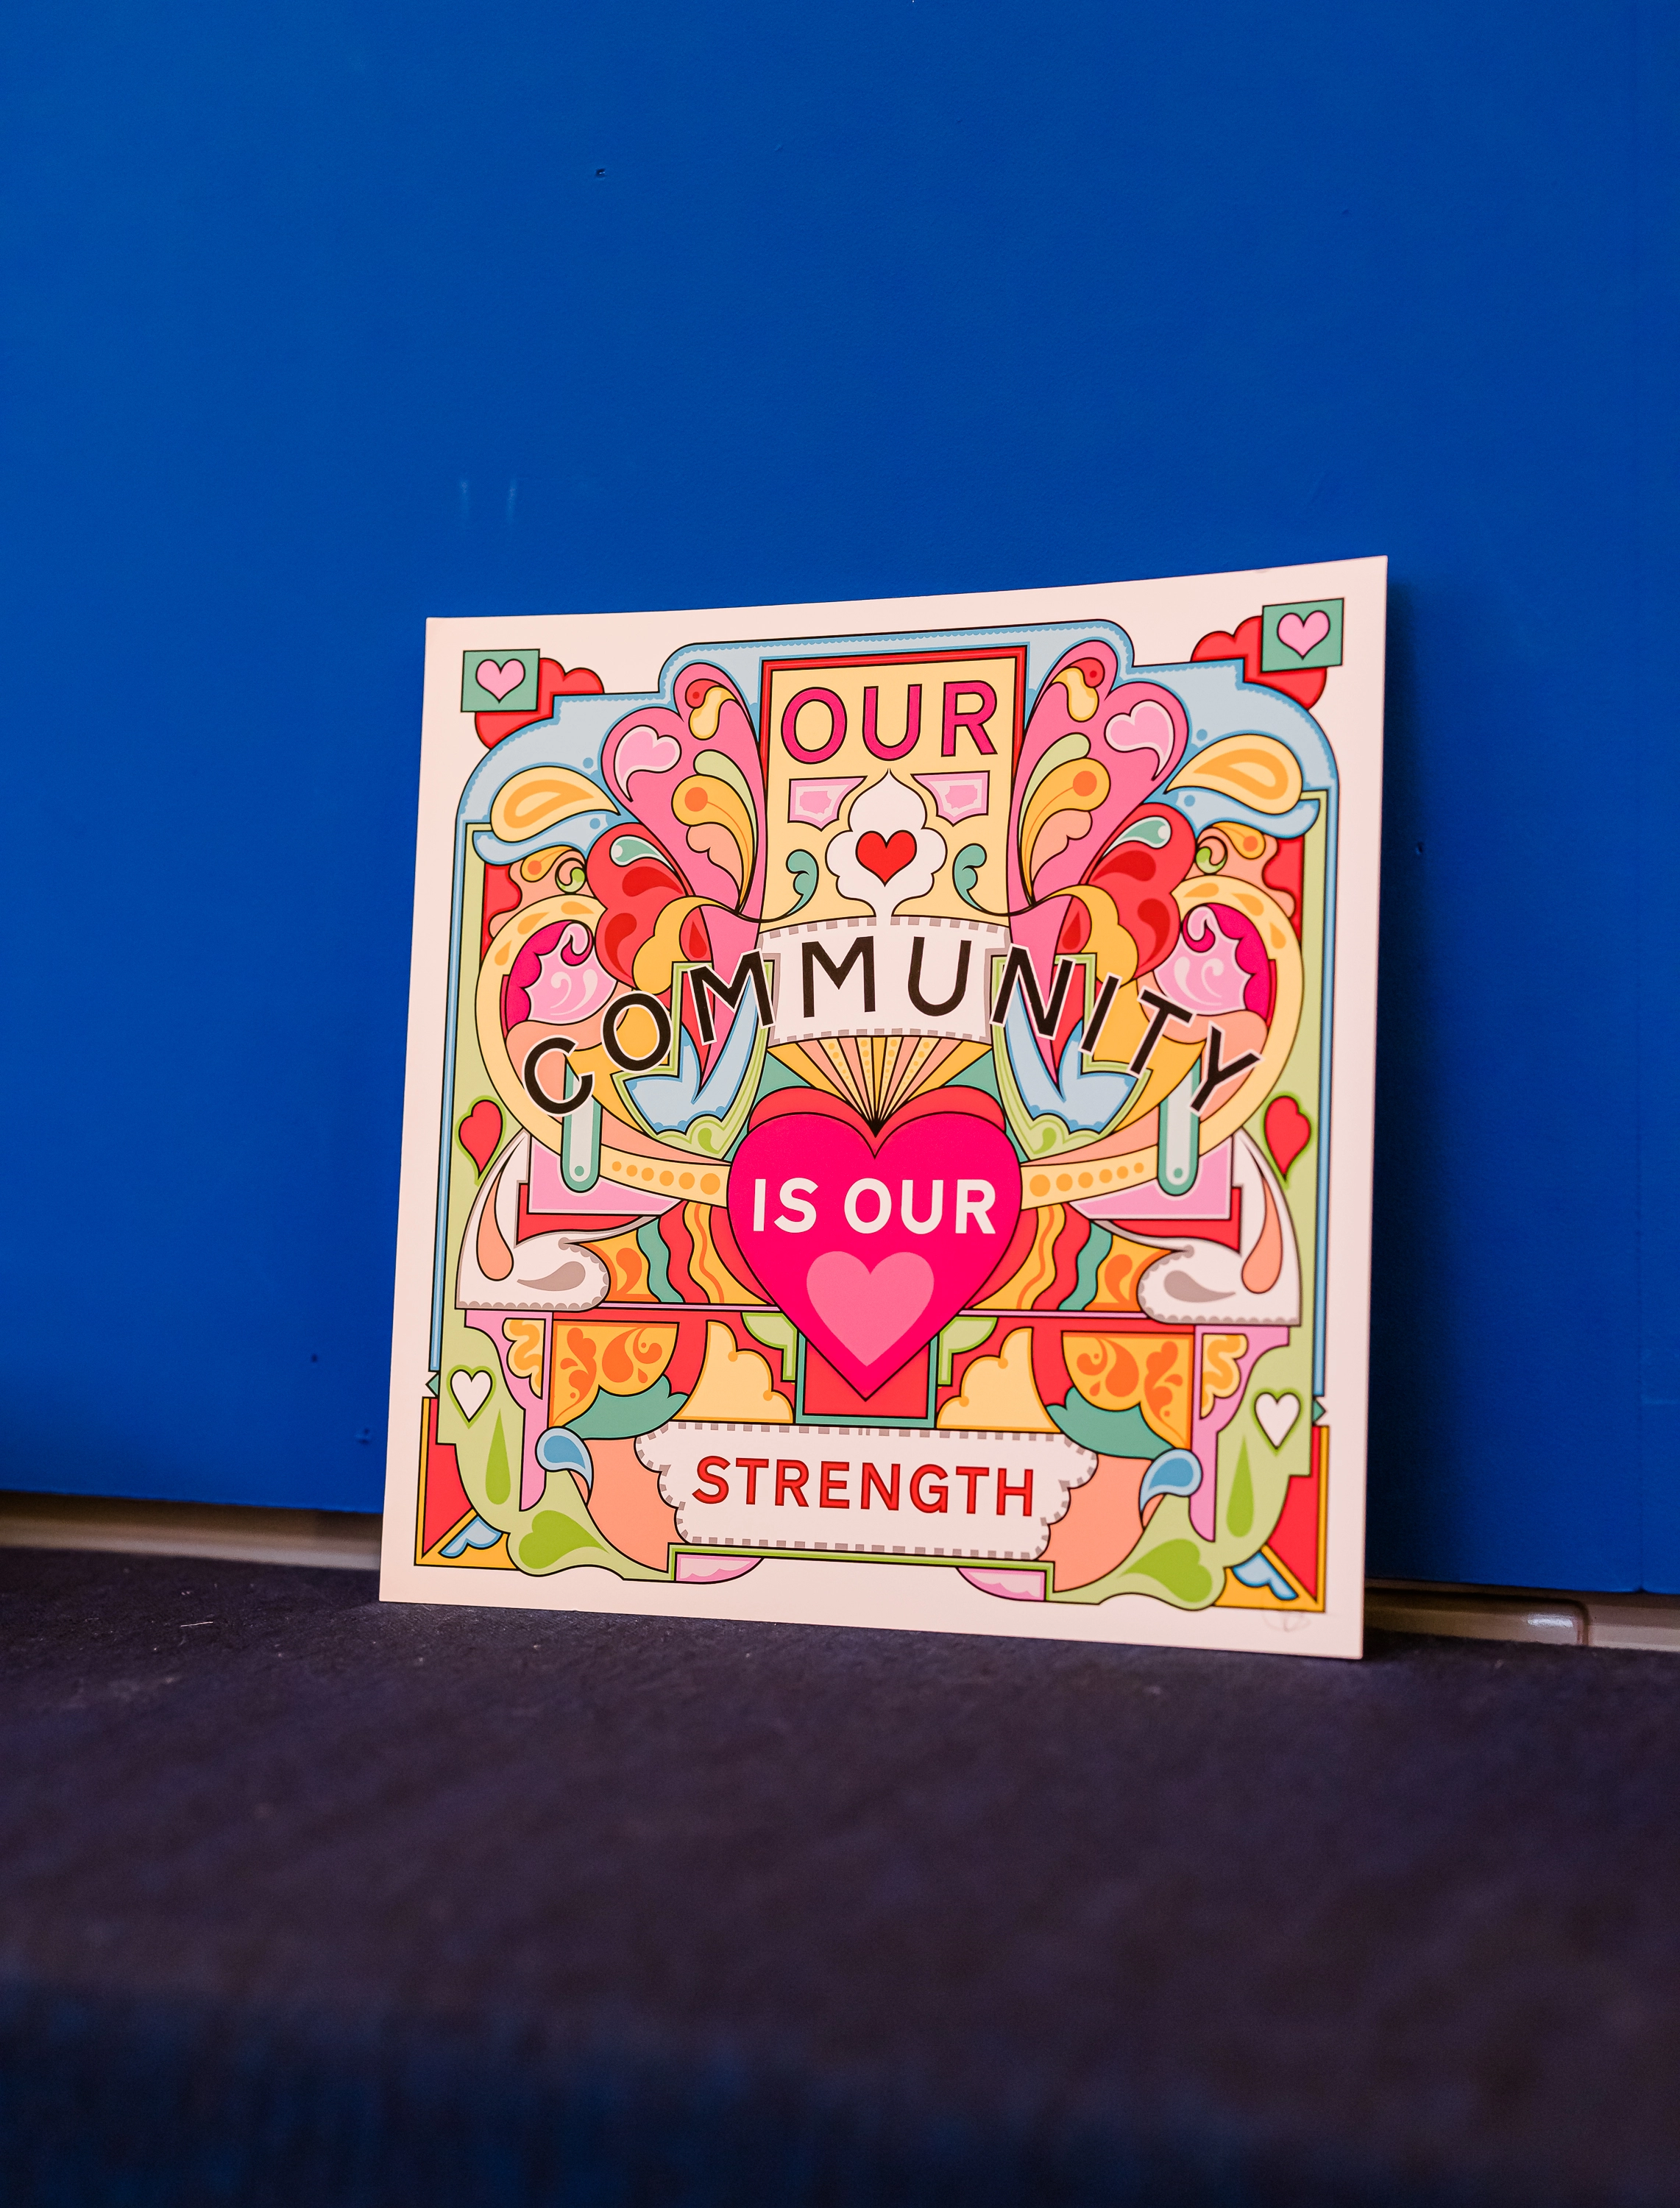 Print by Rebecca Strickson that says 'our community is in our strength'